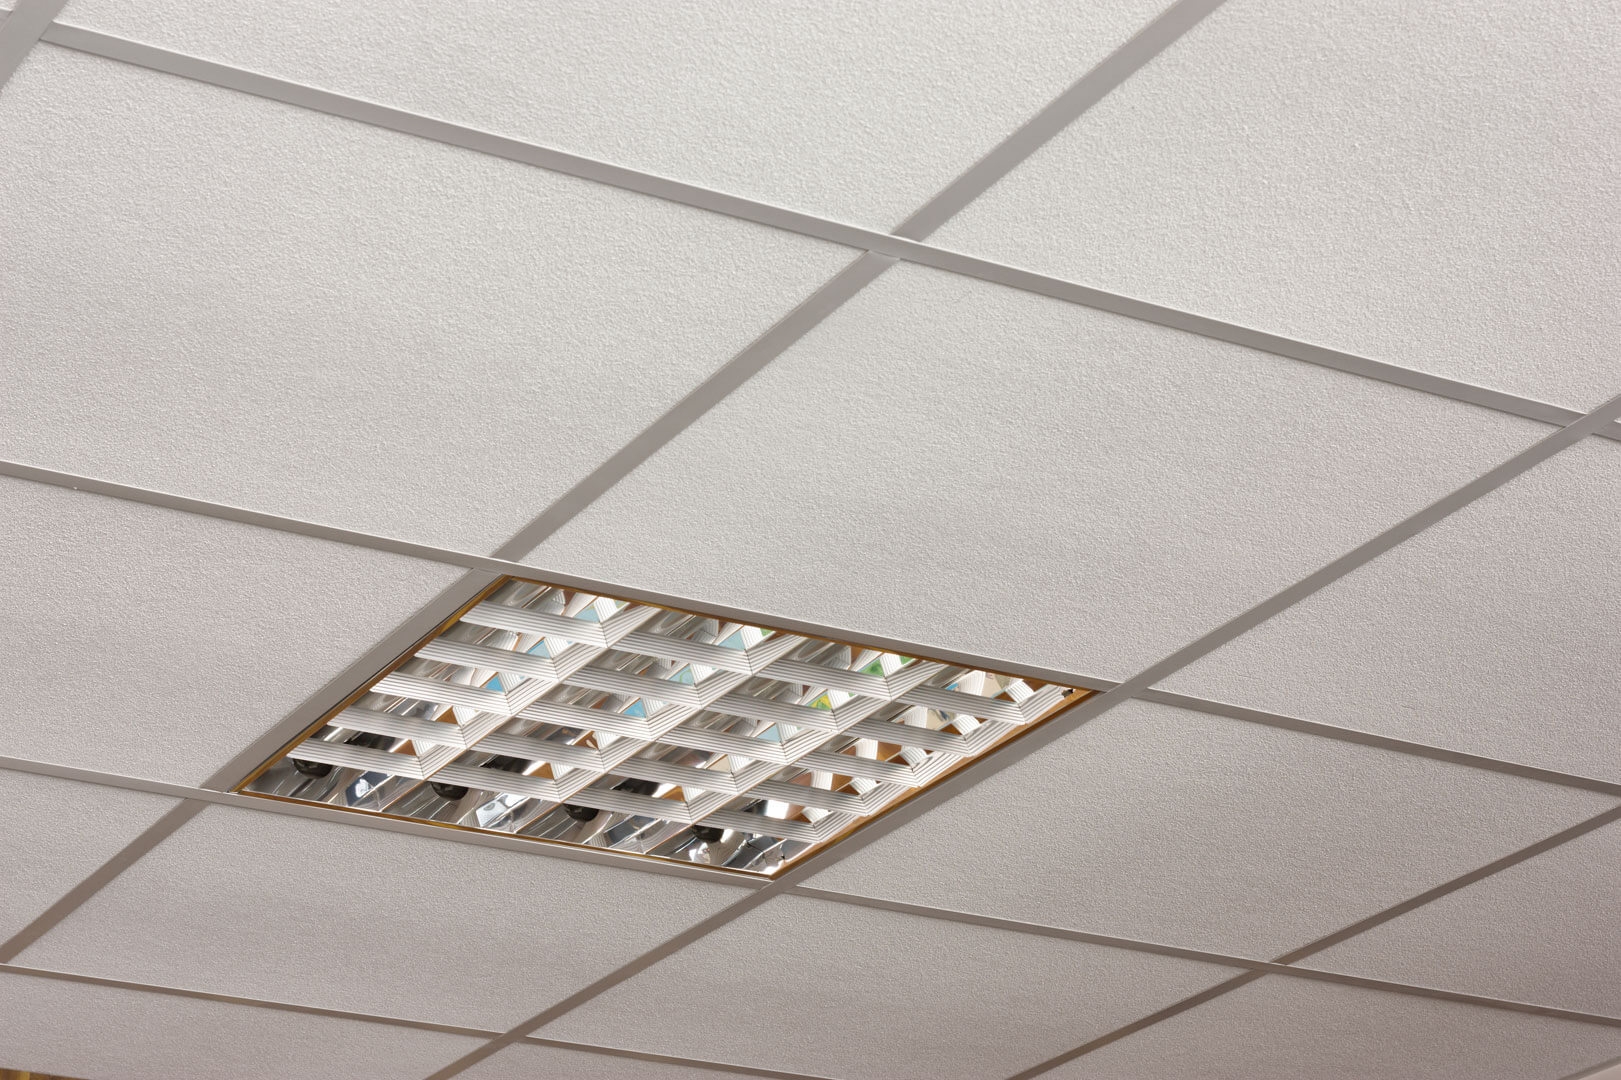 Armstrong Ceiling Tile Lighting Armstrong Ceiling Tile Lighting ceiling tiles lights accessories a leading uk supplier of 1621 X 1080